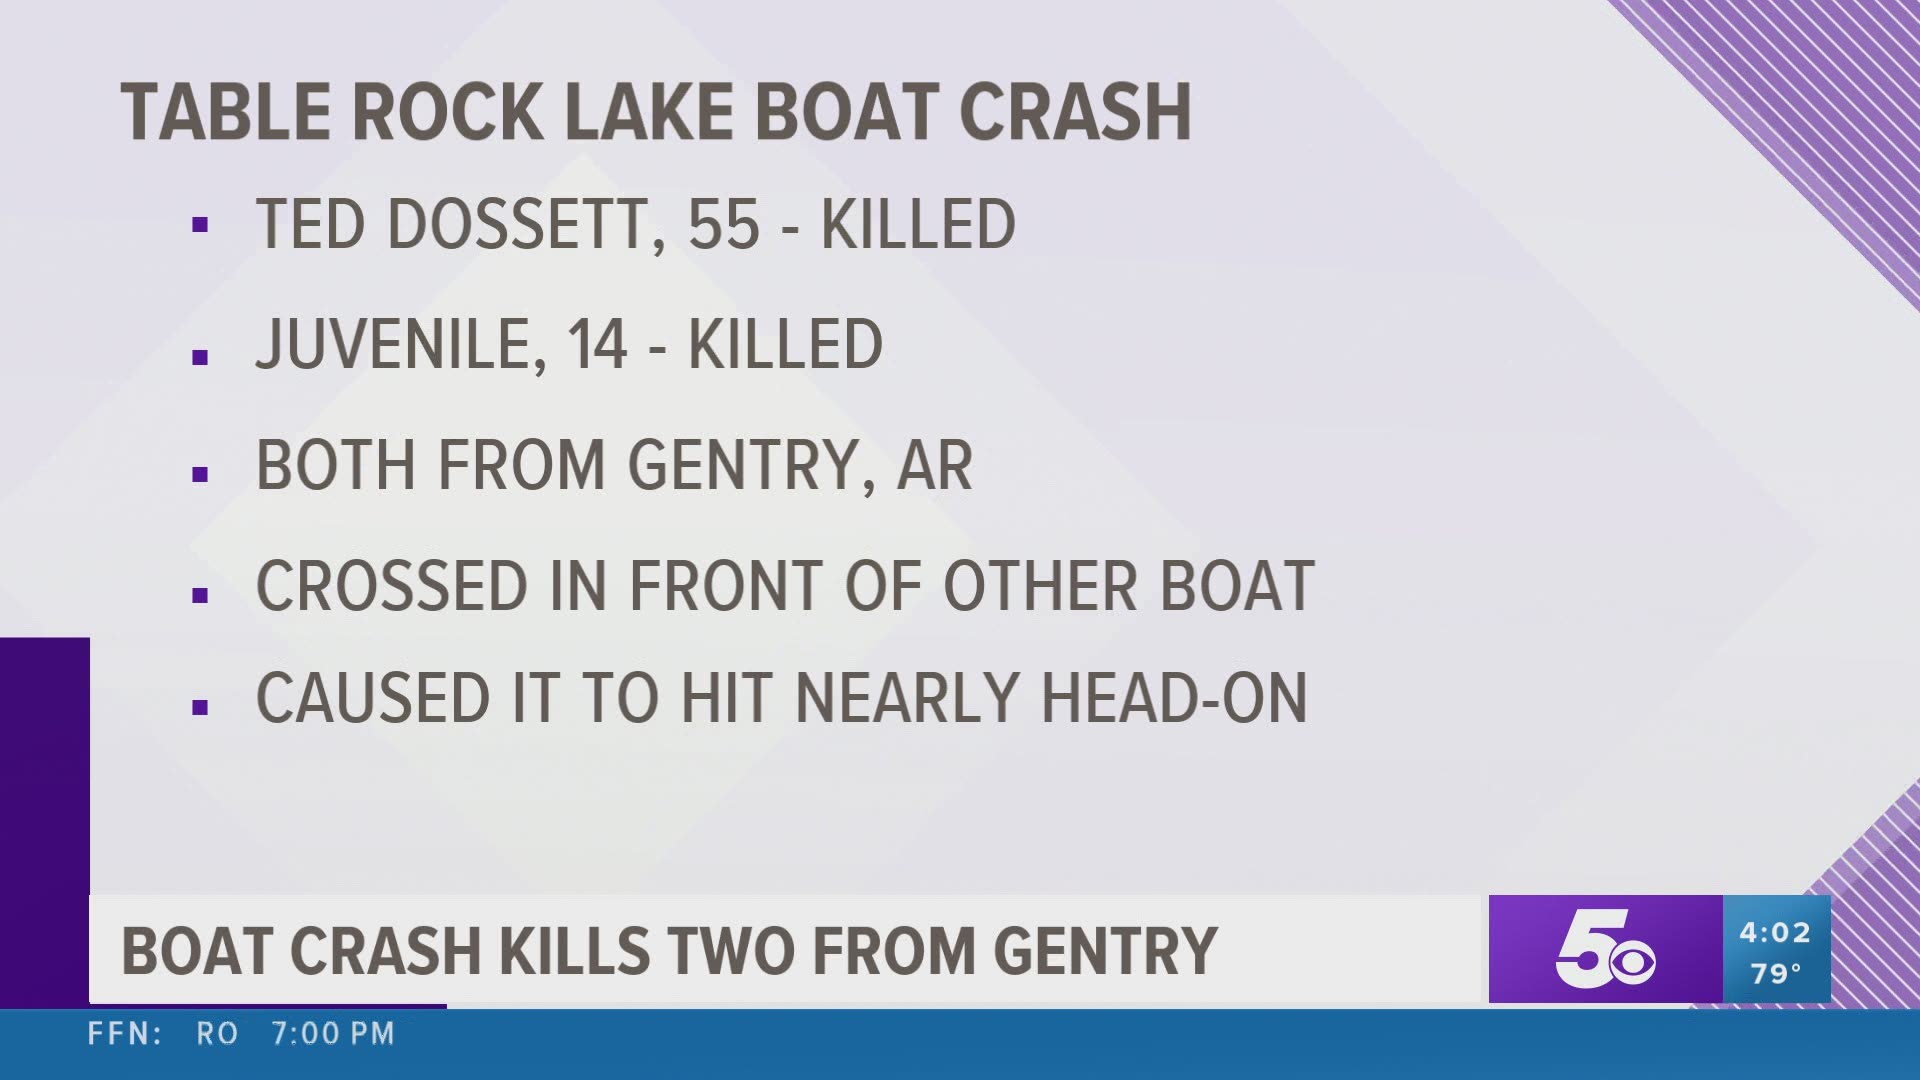 Boat crash kills two from Gentry.